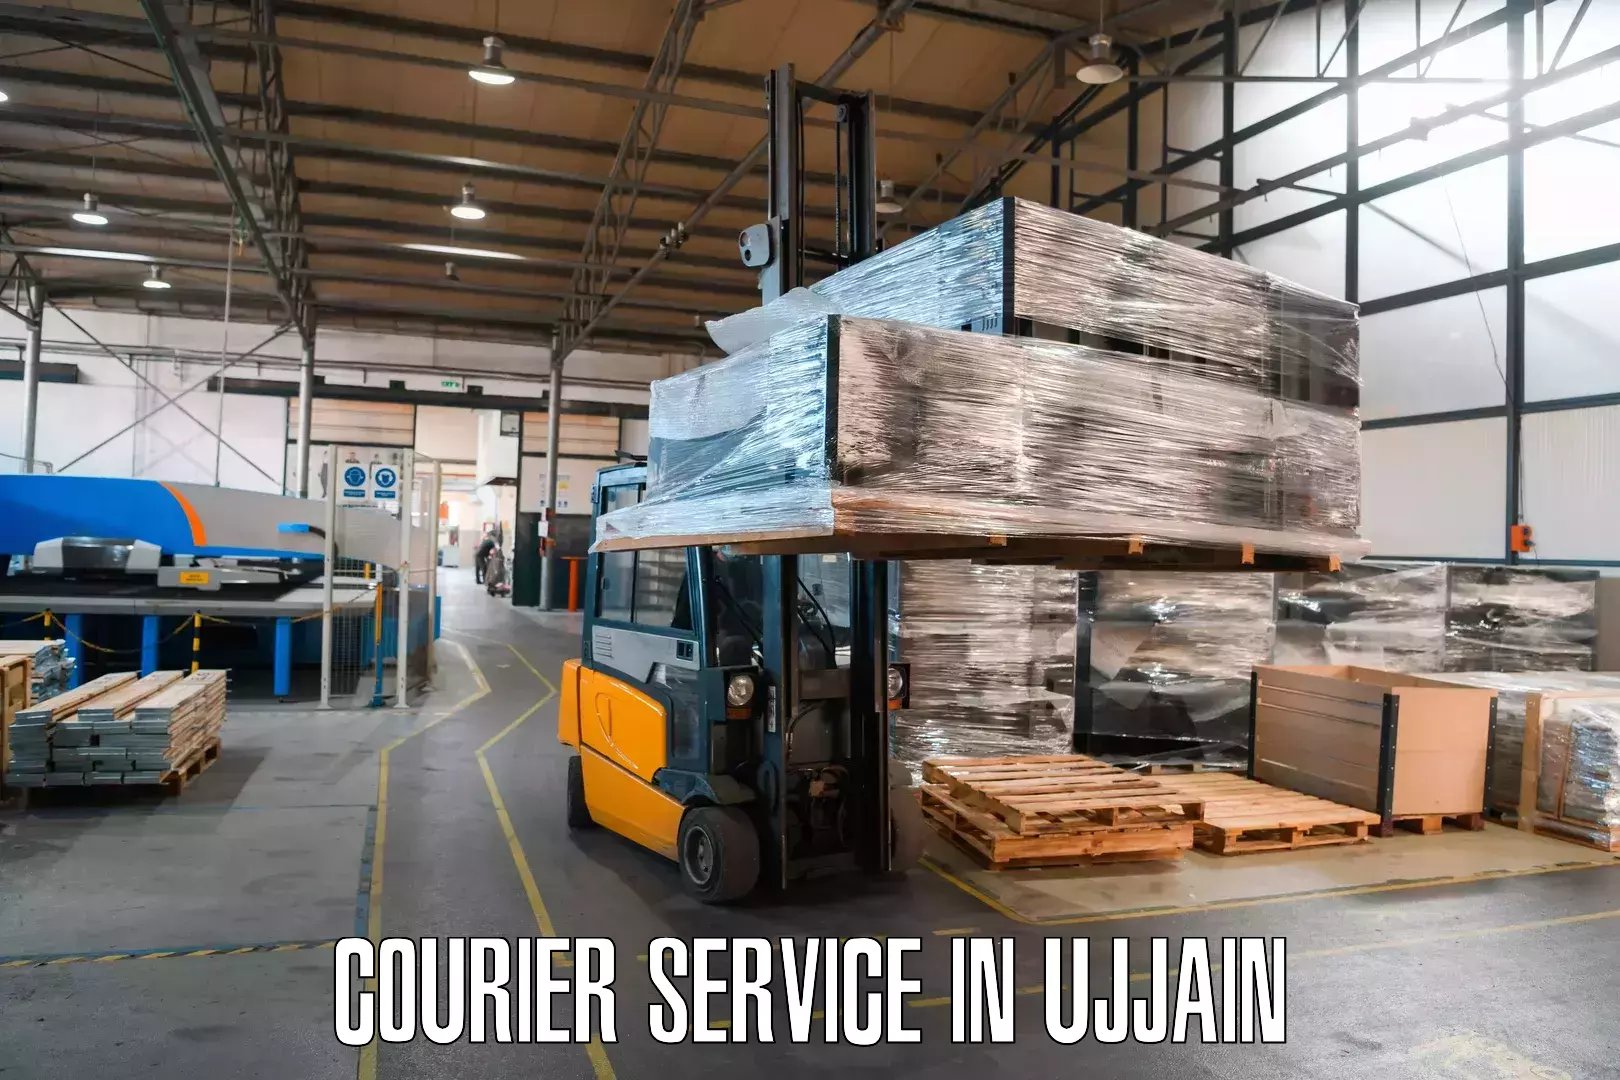 State-of-the-art courier technology in Ujjain